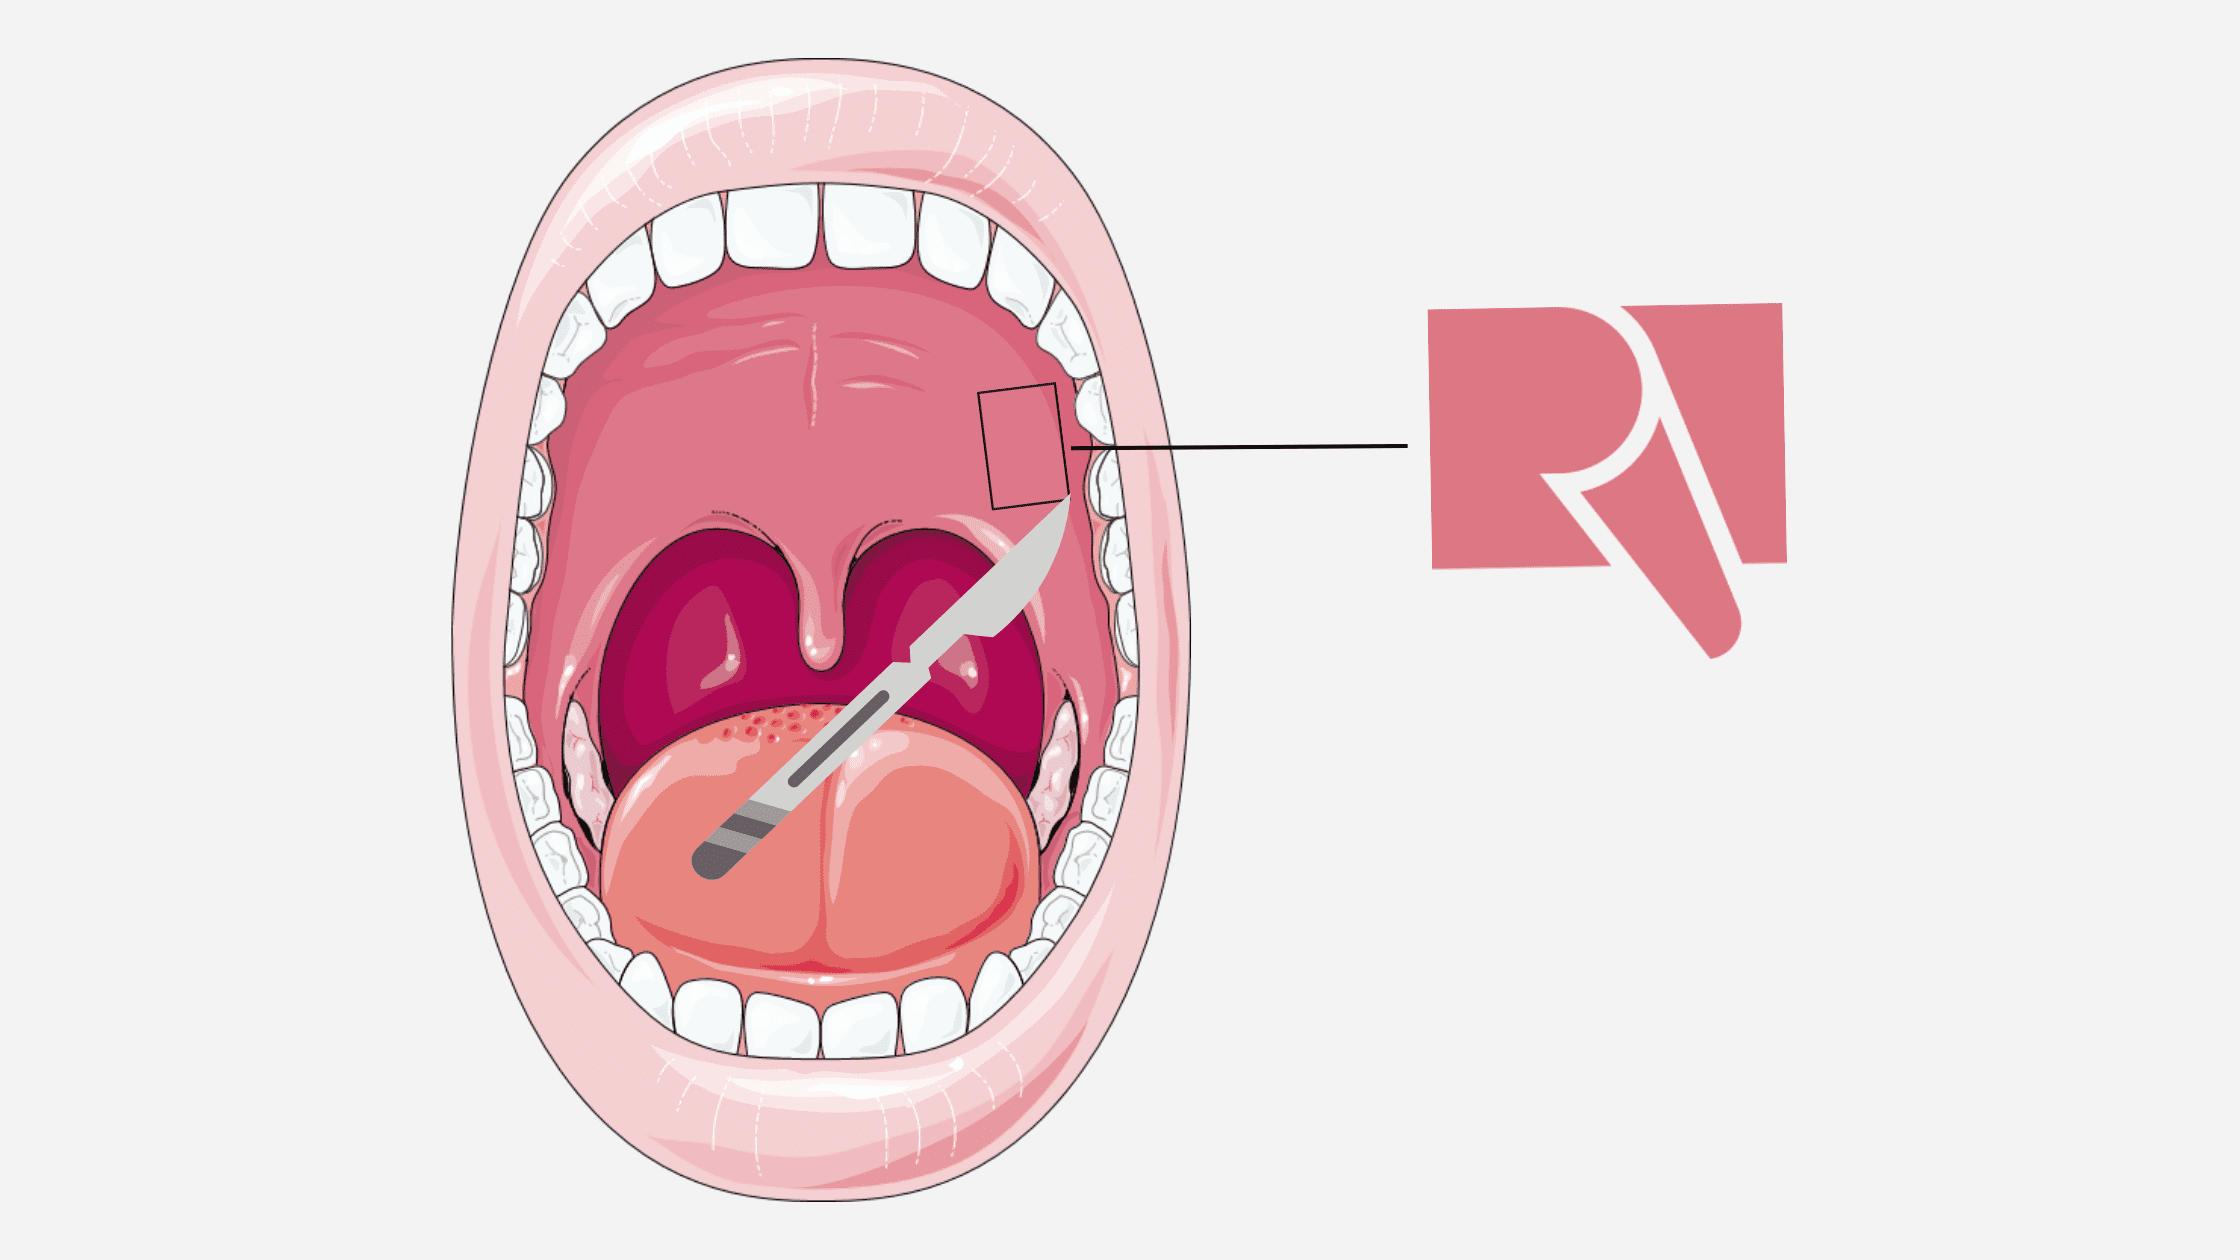 Harvesting soft tissue from the palate